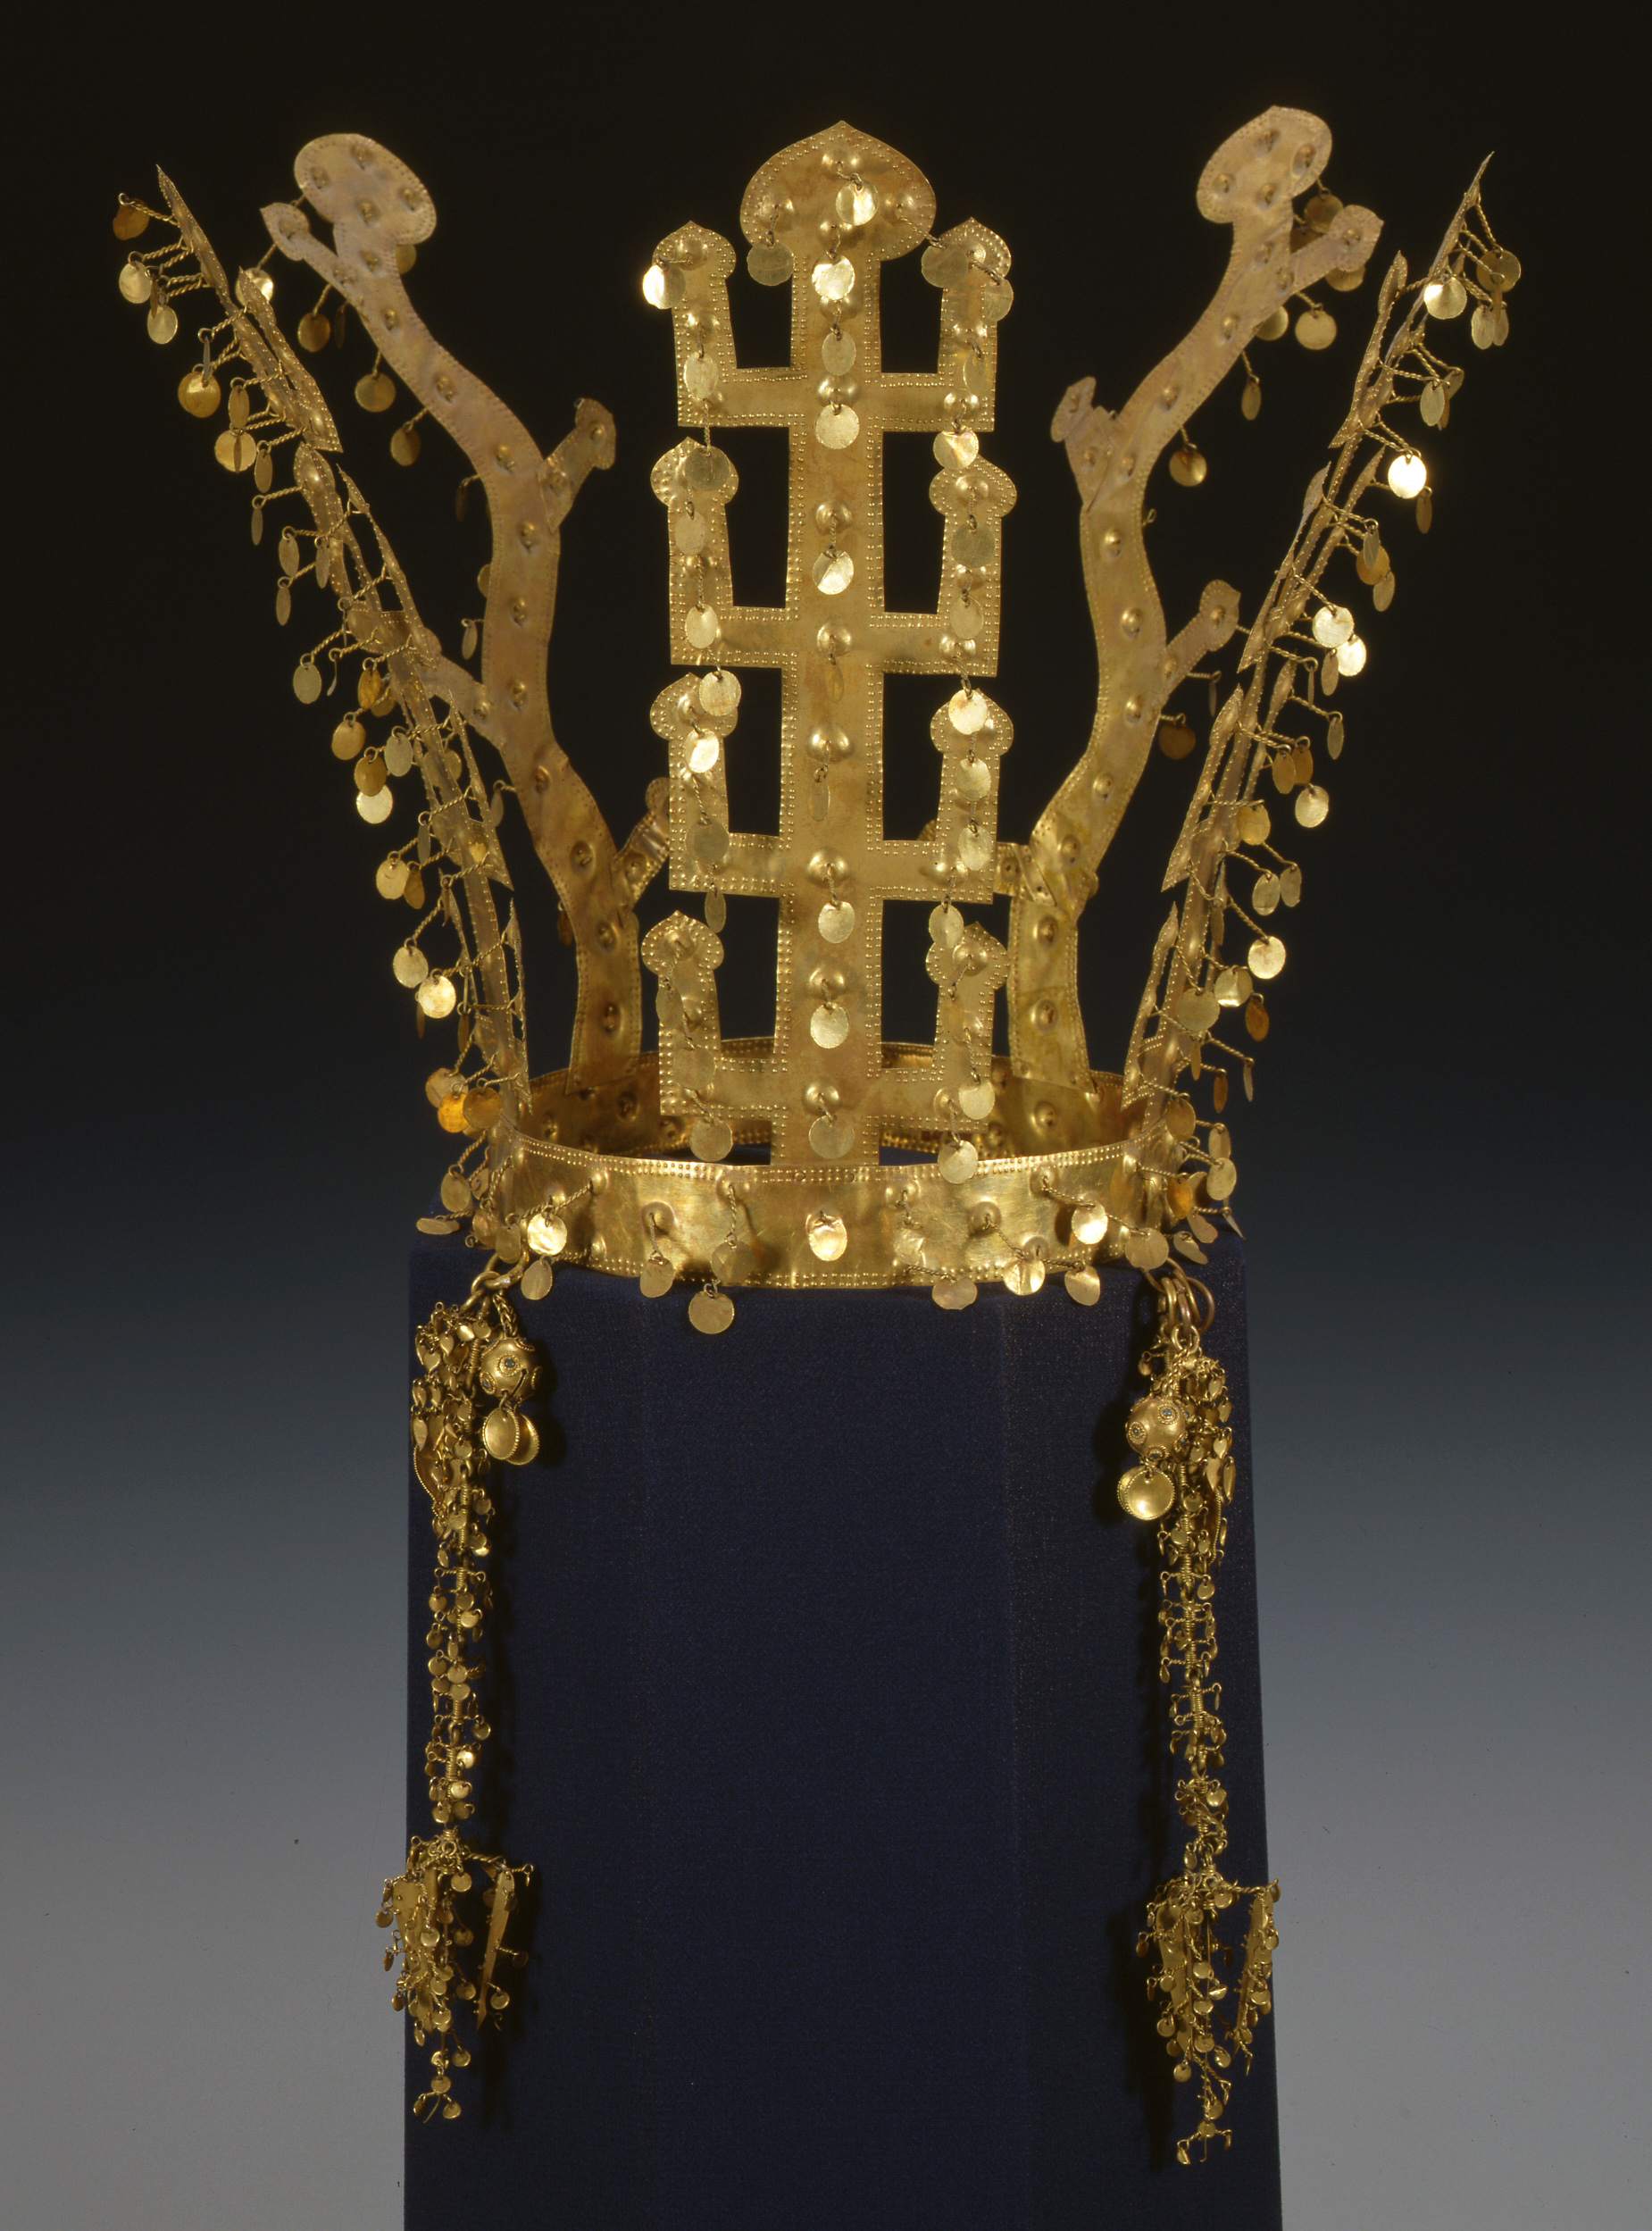 Gold crown and gold belt from the north mound of Hwangnamdaechong Tomb